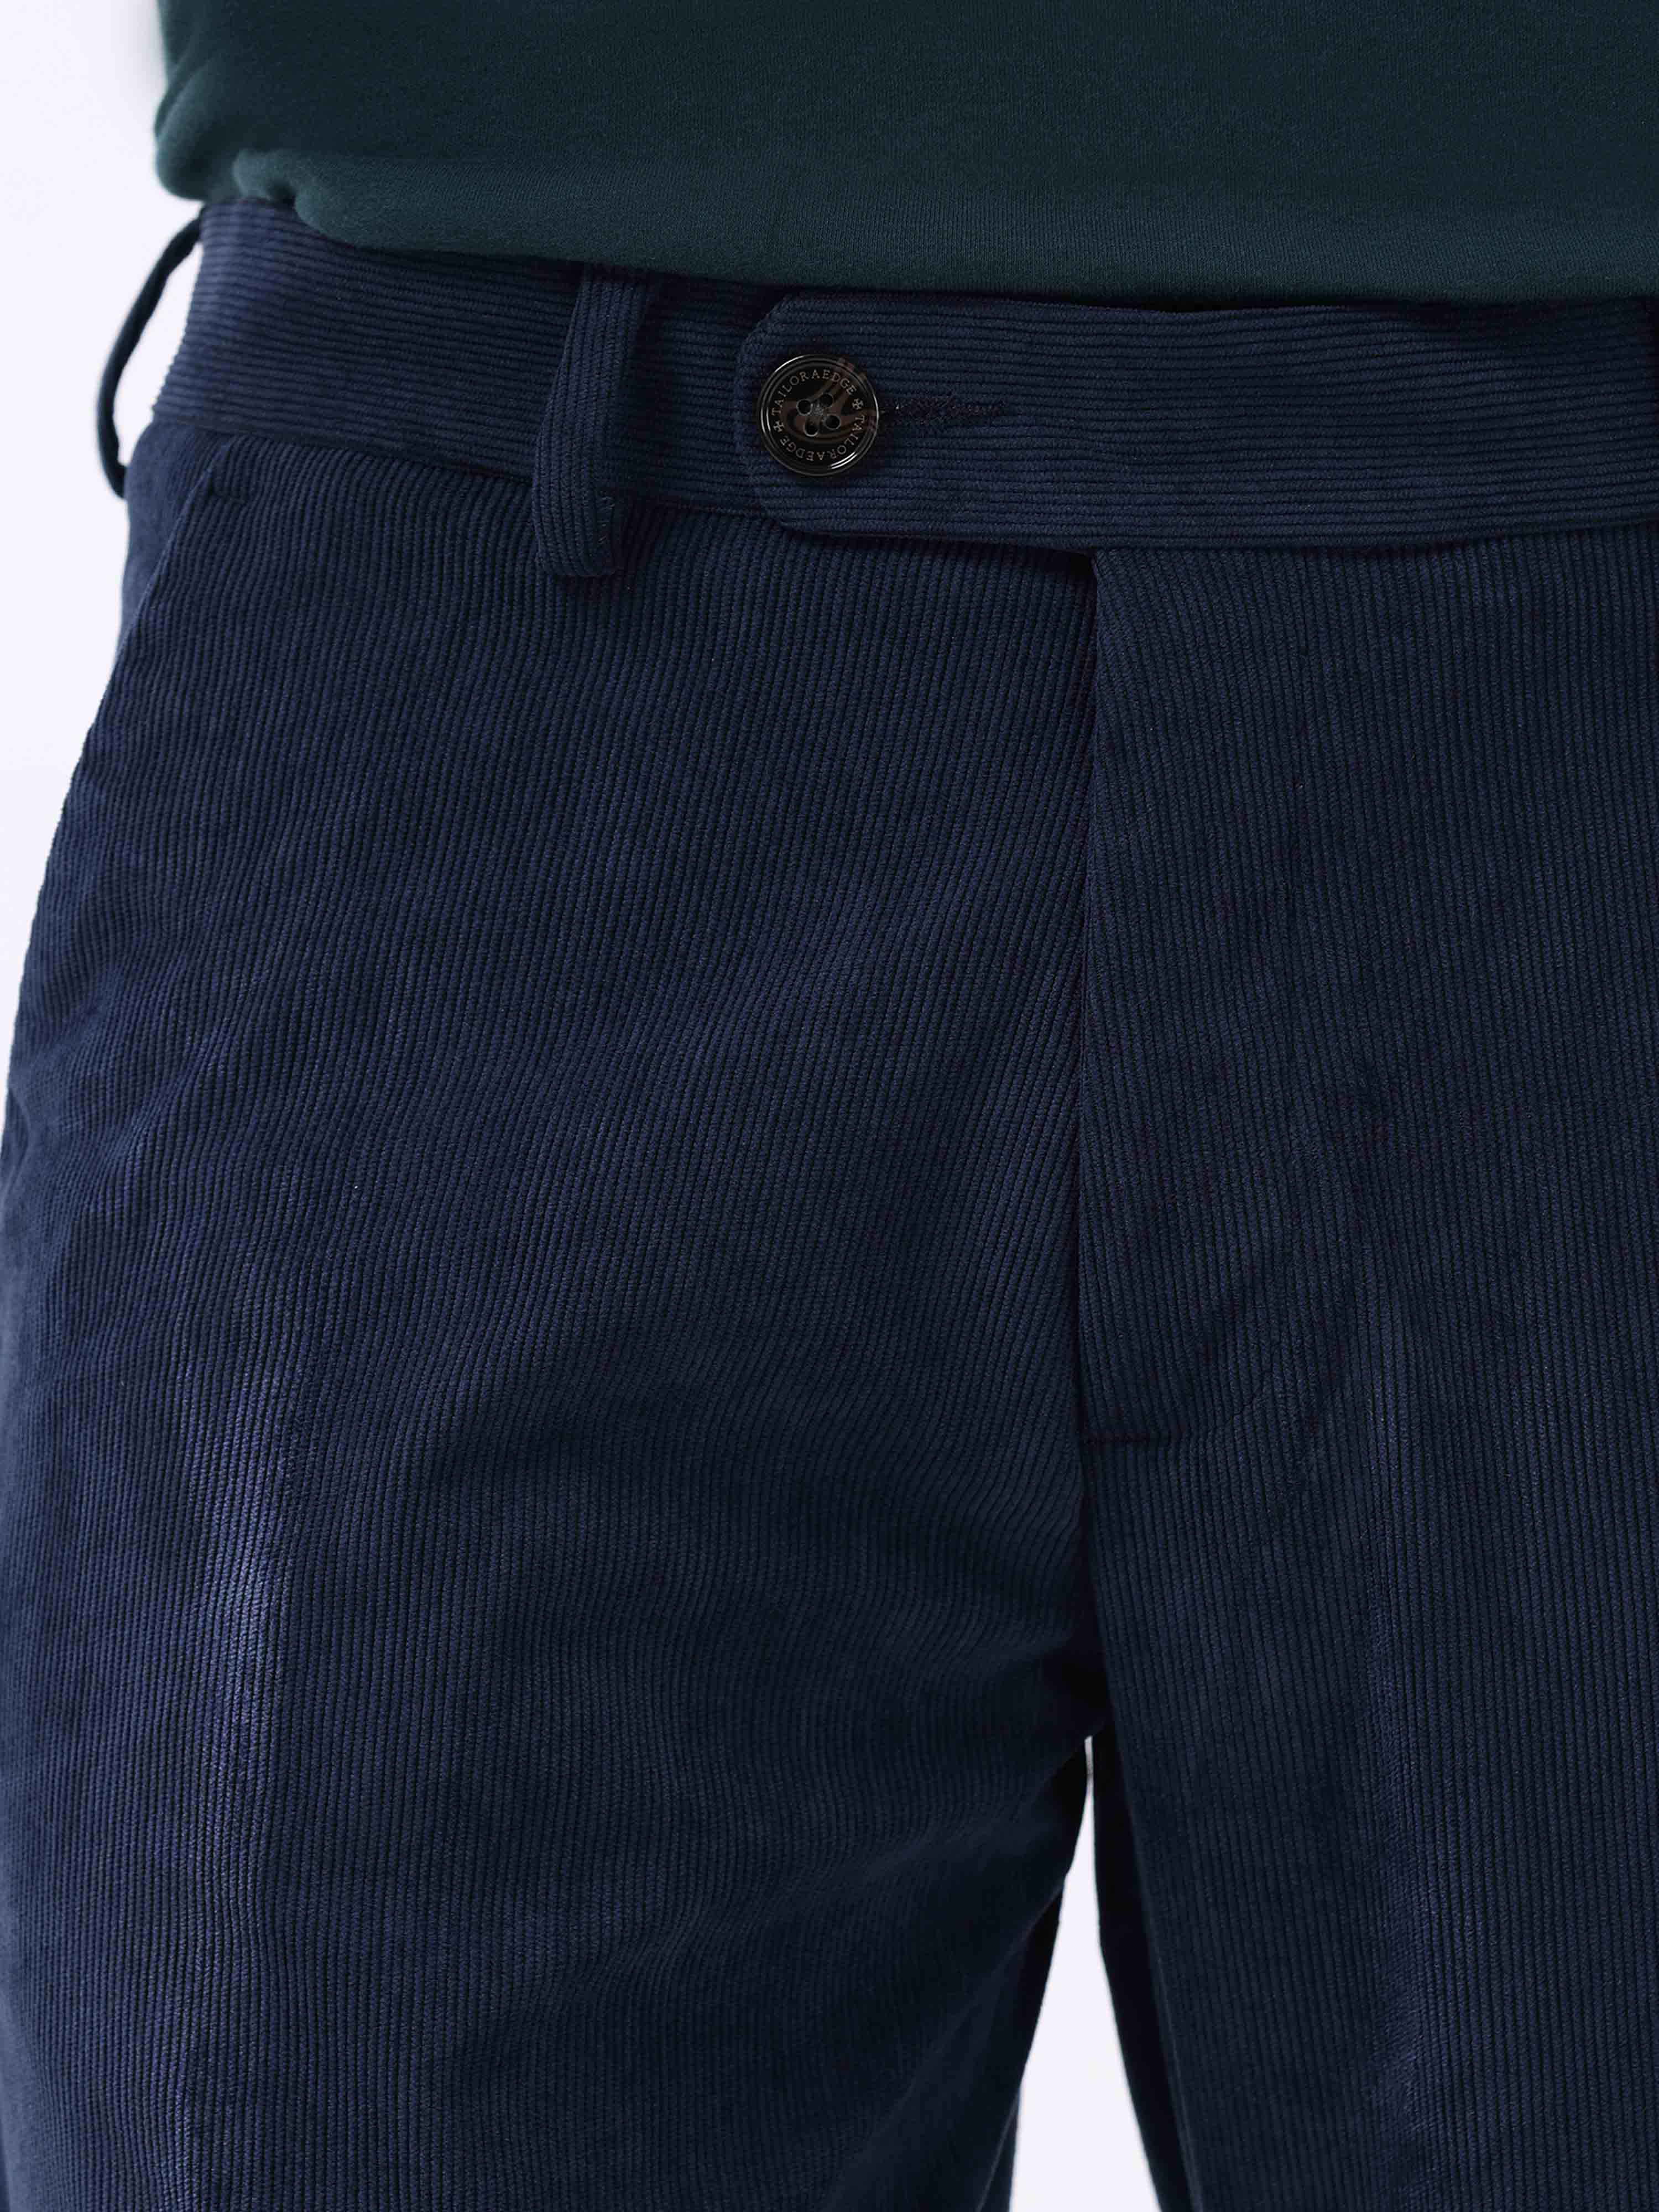 Navy Blue Mens Corduroy Pants Limited Edition Dark Blue Corduroy Trousers  for Men Ships Tomorrow - Etsy